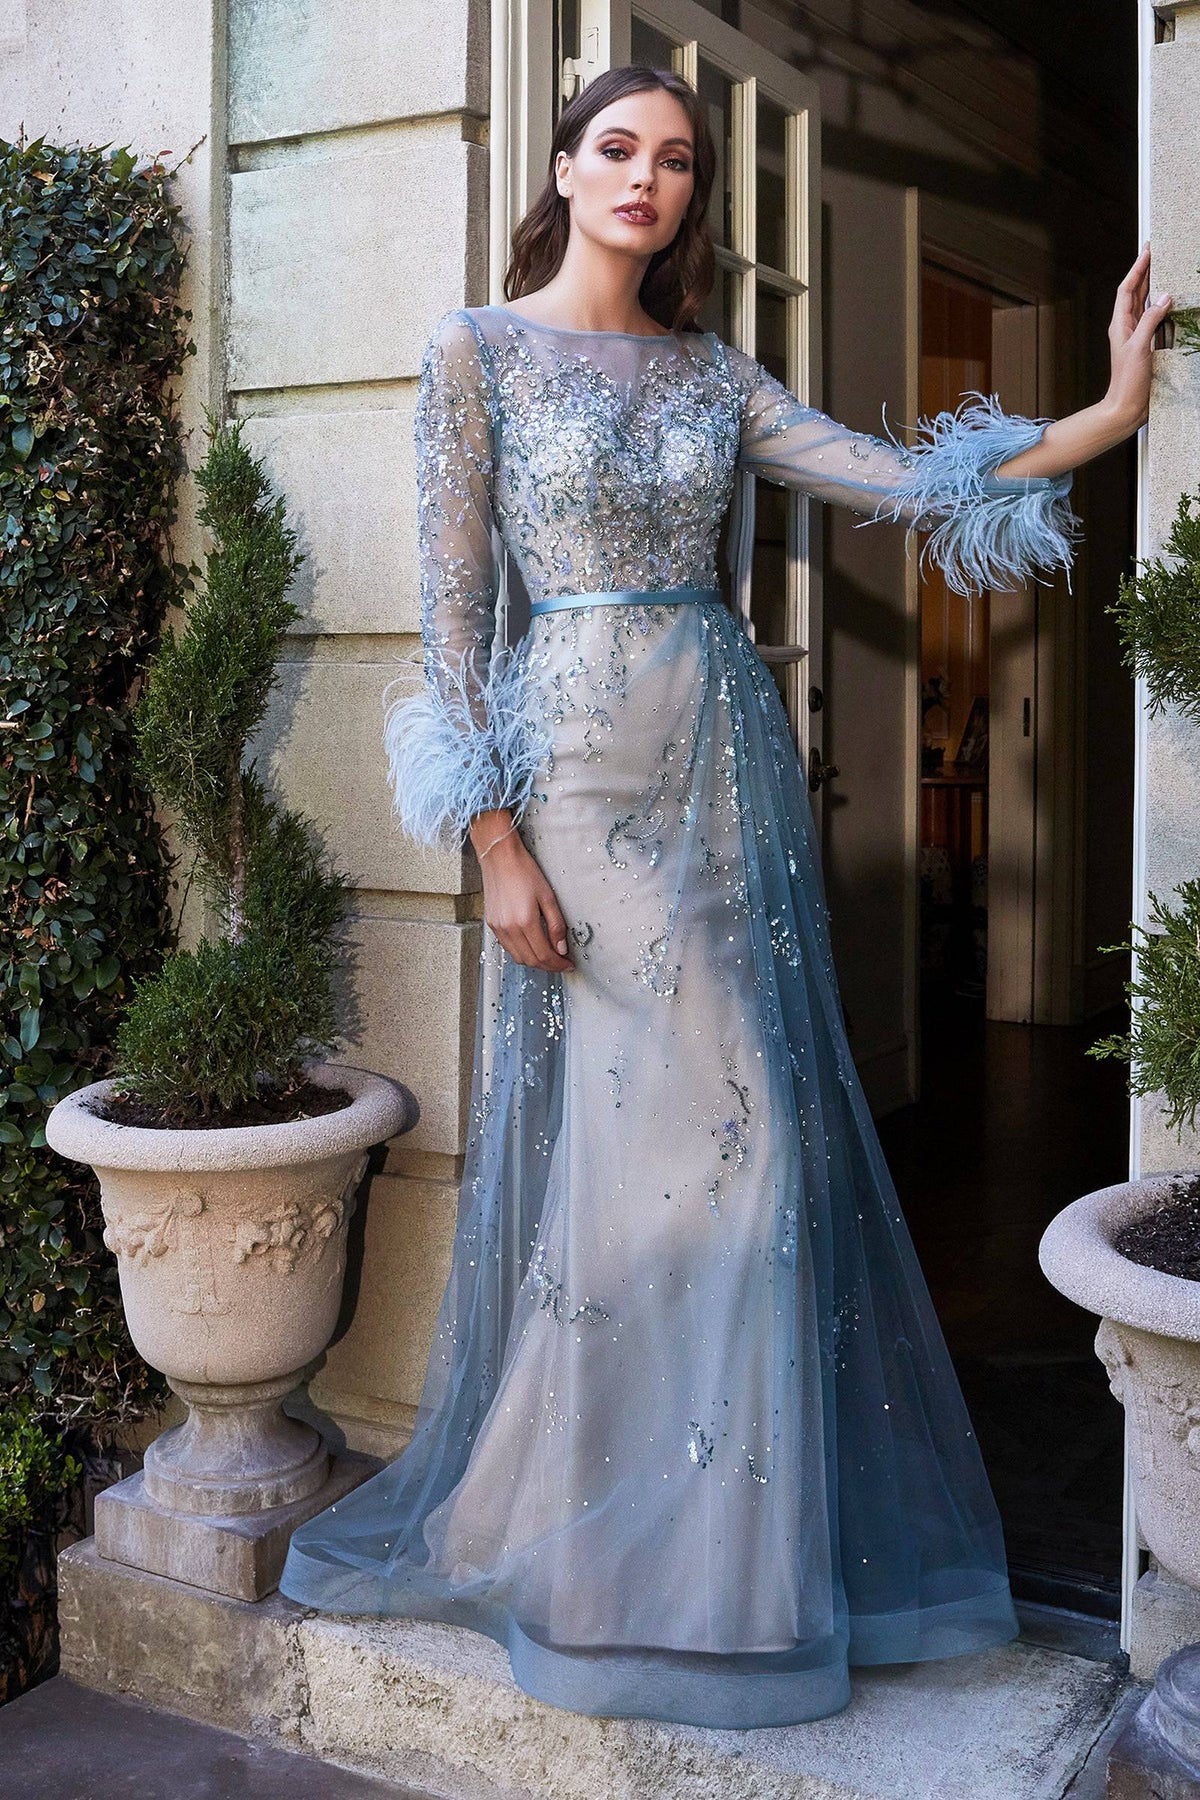 Pretty Long Dress With Sheer Overlay and Feather Accents on Sleeves #CDB716